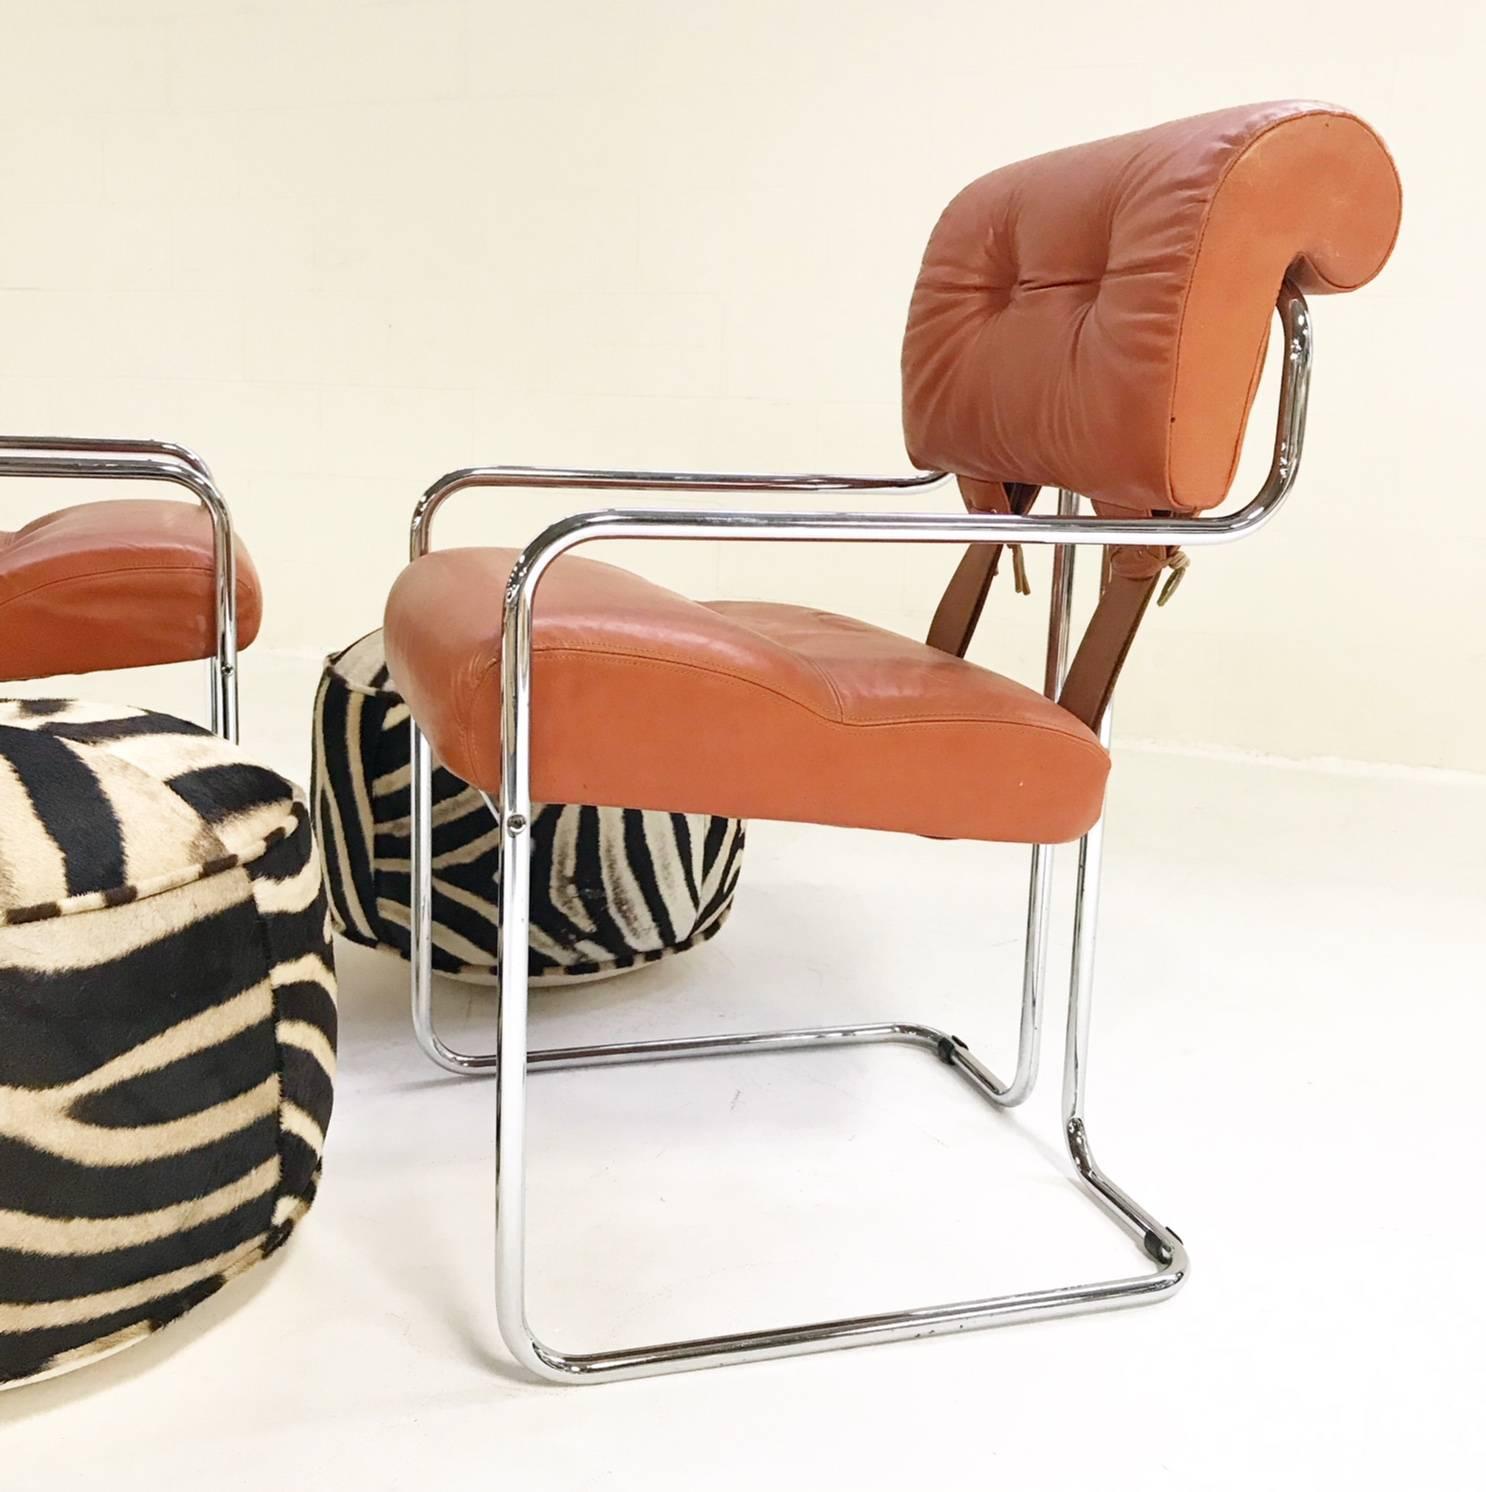 1970s vibes! These extremely comfortable chairs were designed by Guido Faleschini in 1972 and produced in Italy by Mariani for the Pace Collection. The tobacco hued leather is all original and in very good condition. We paired the striking pair with